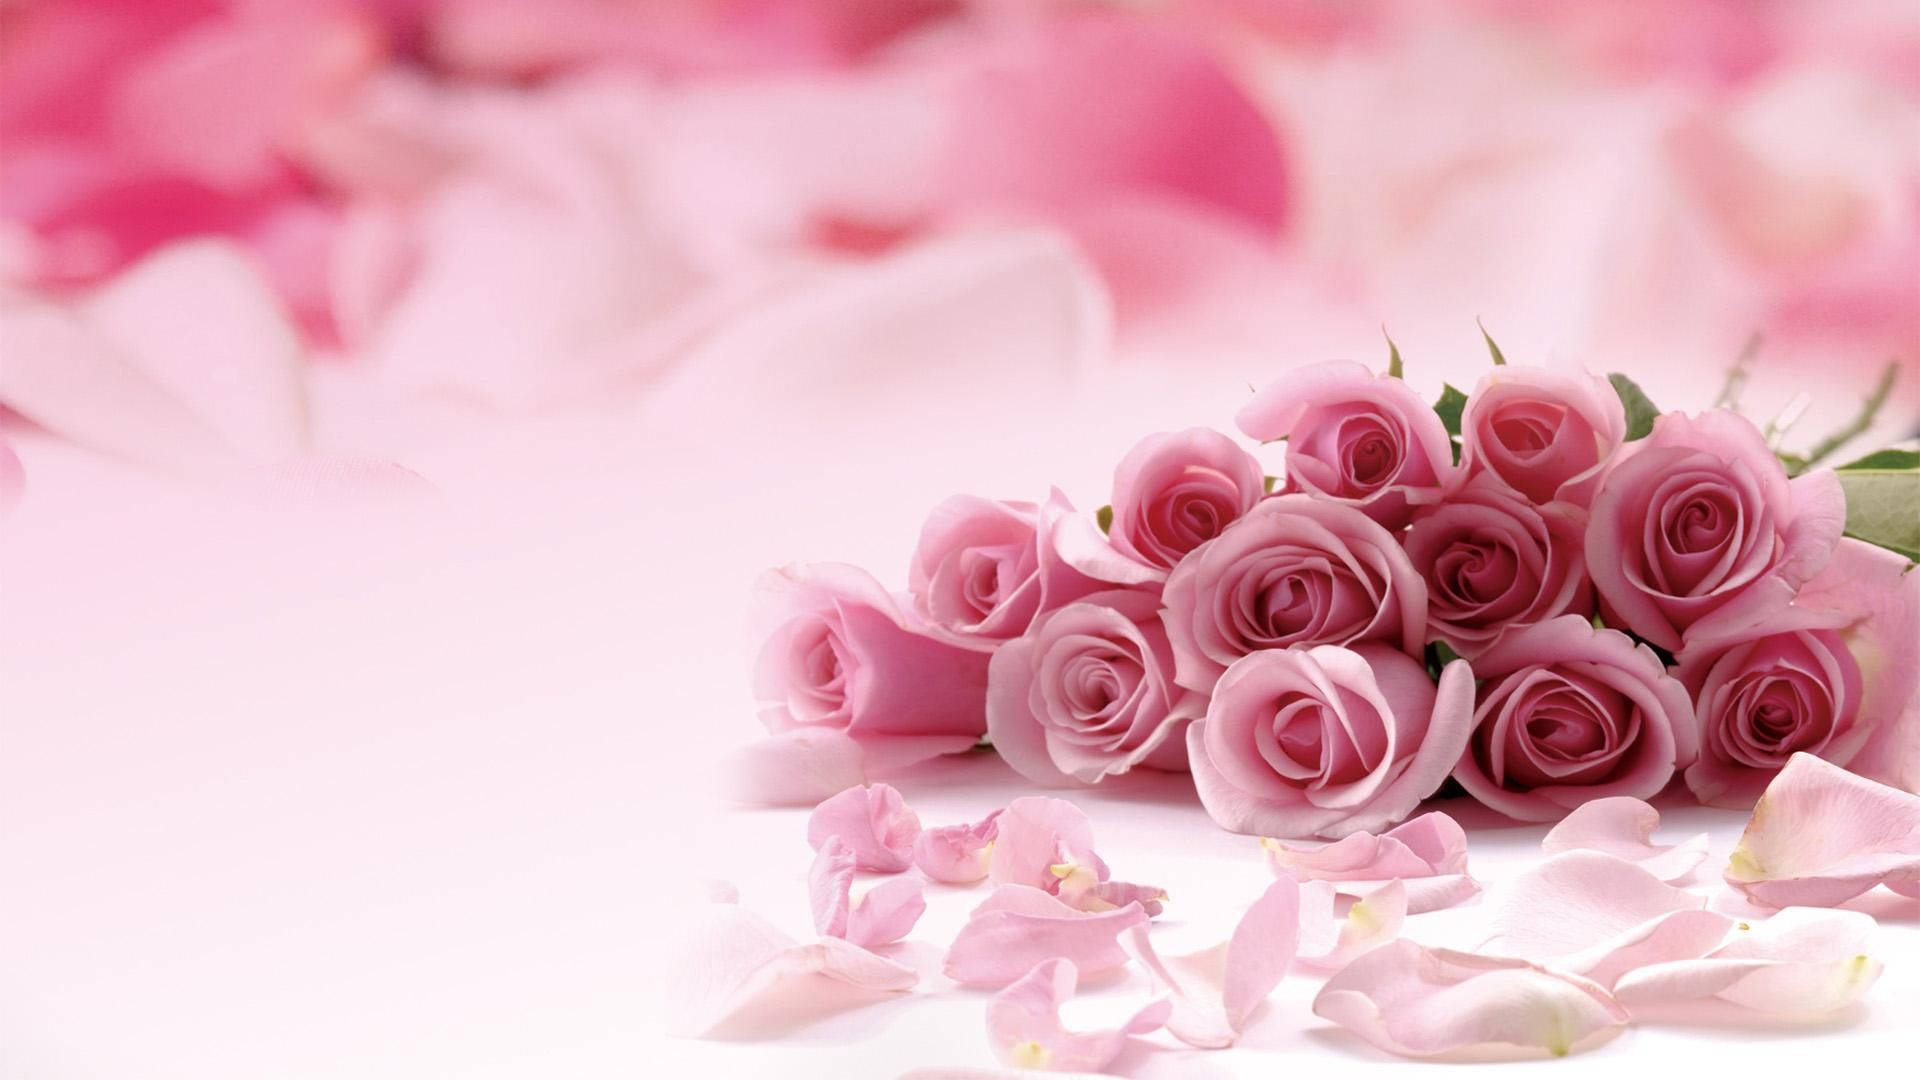 A beautiful pink rose blossoming in its full glory. Wallpaper